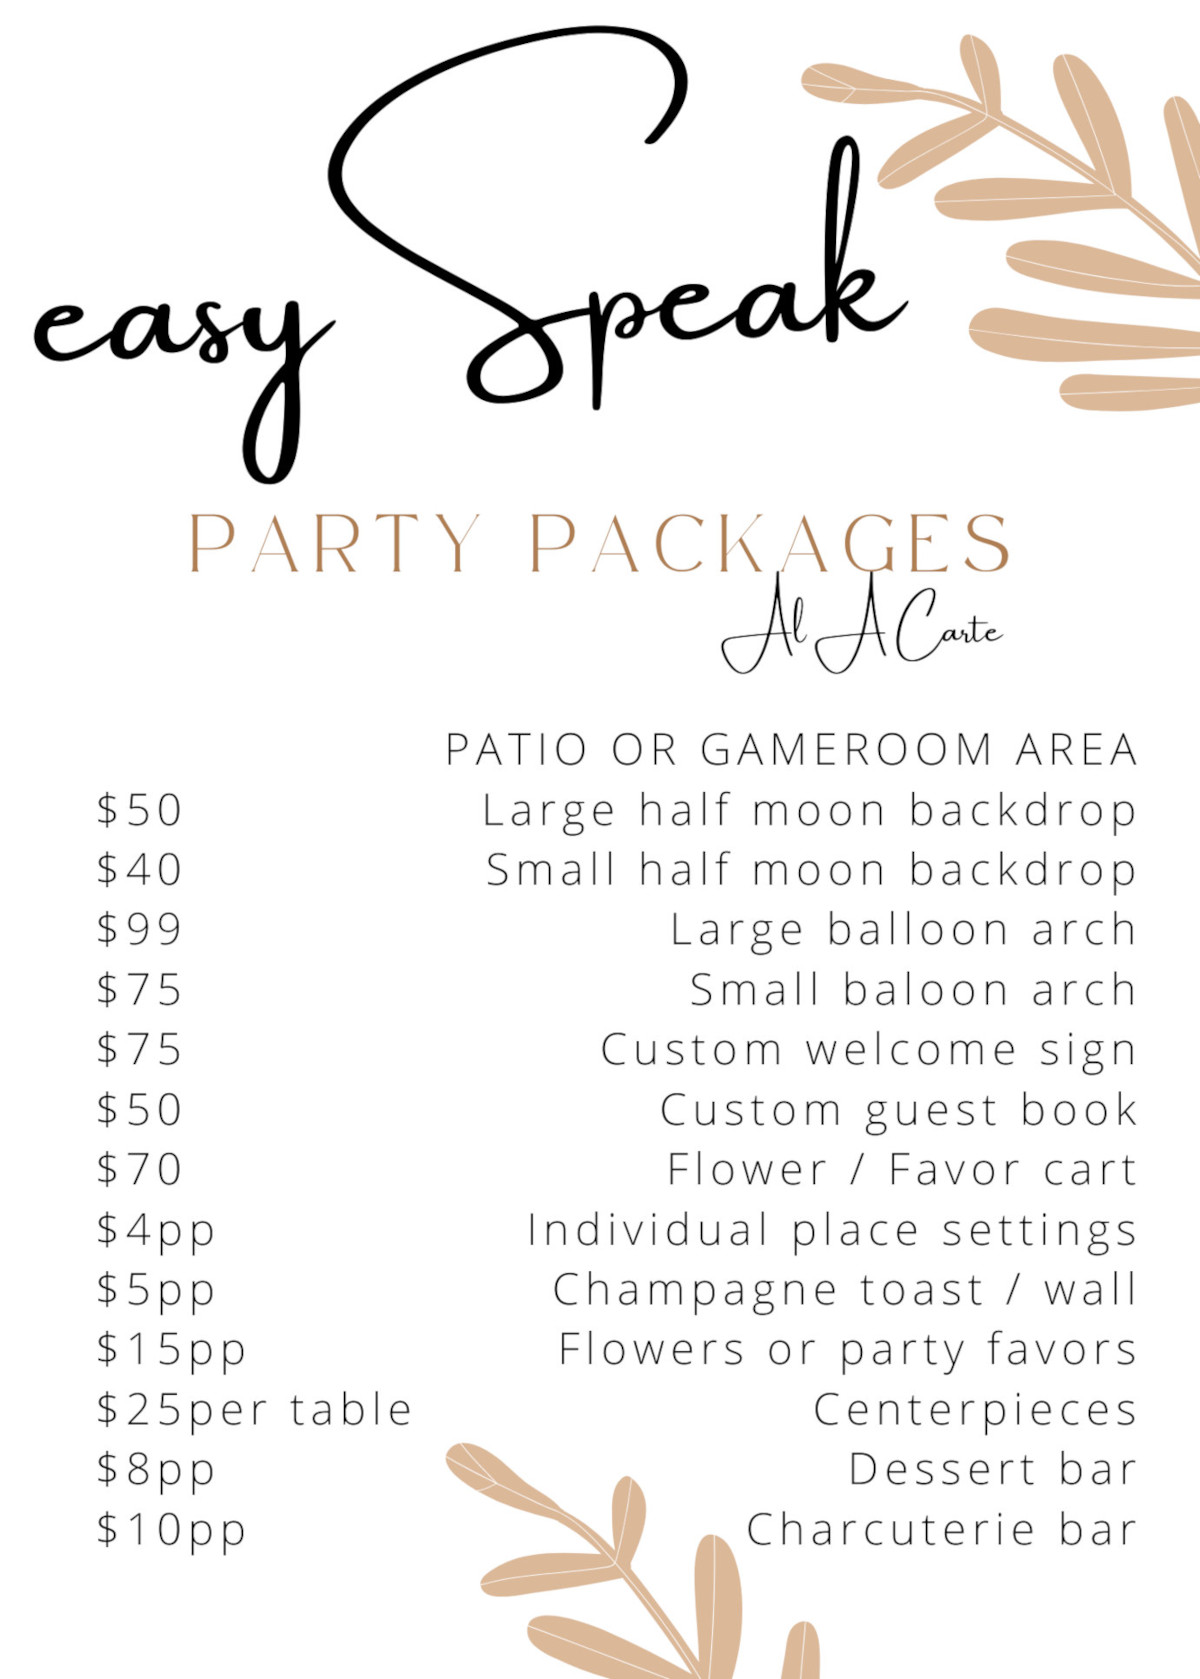 easy speak party packages patio or gameroom area